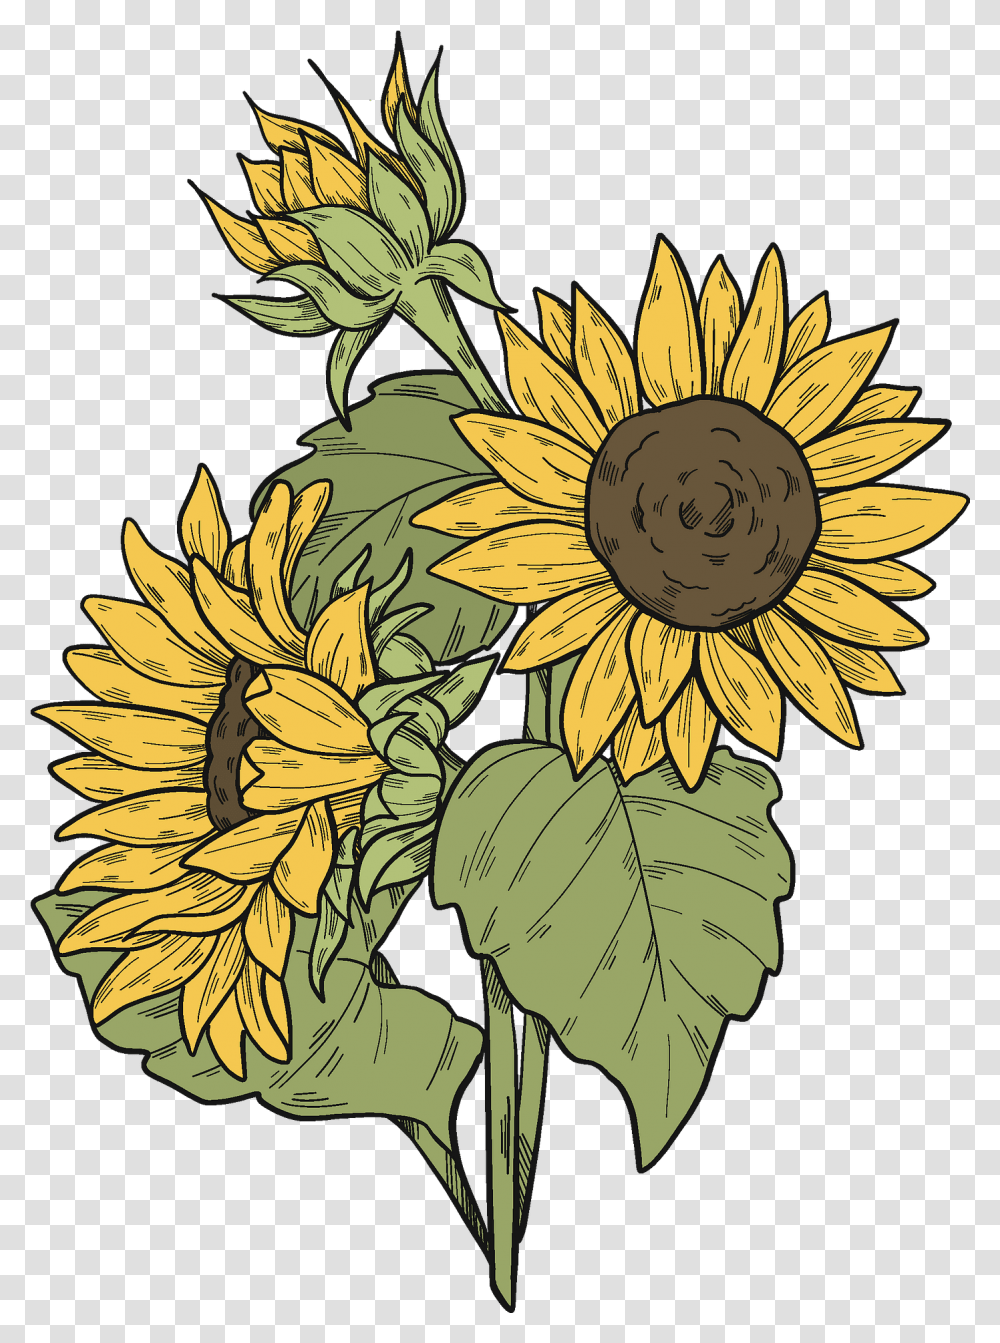 Sunflowers Clipart Free Download Creazilla Clipart Images Of Sunflowers, Plant, Blossom, Pattern, Floral Design Transparent Png